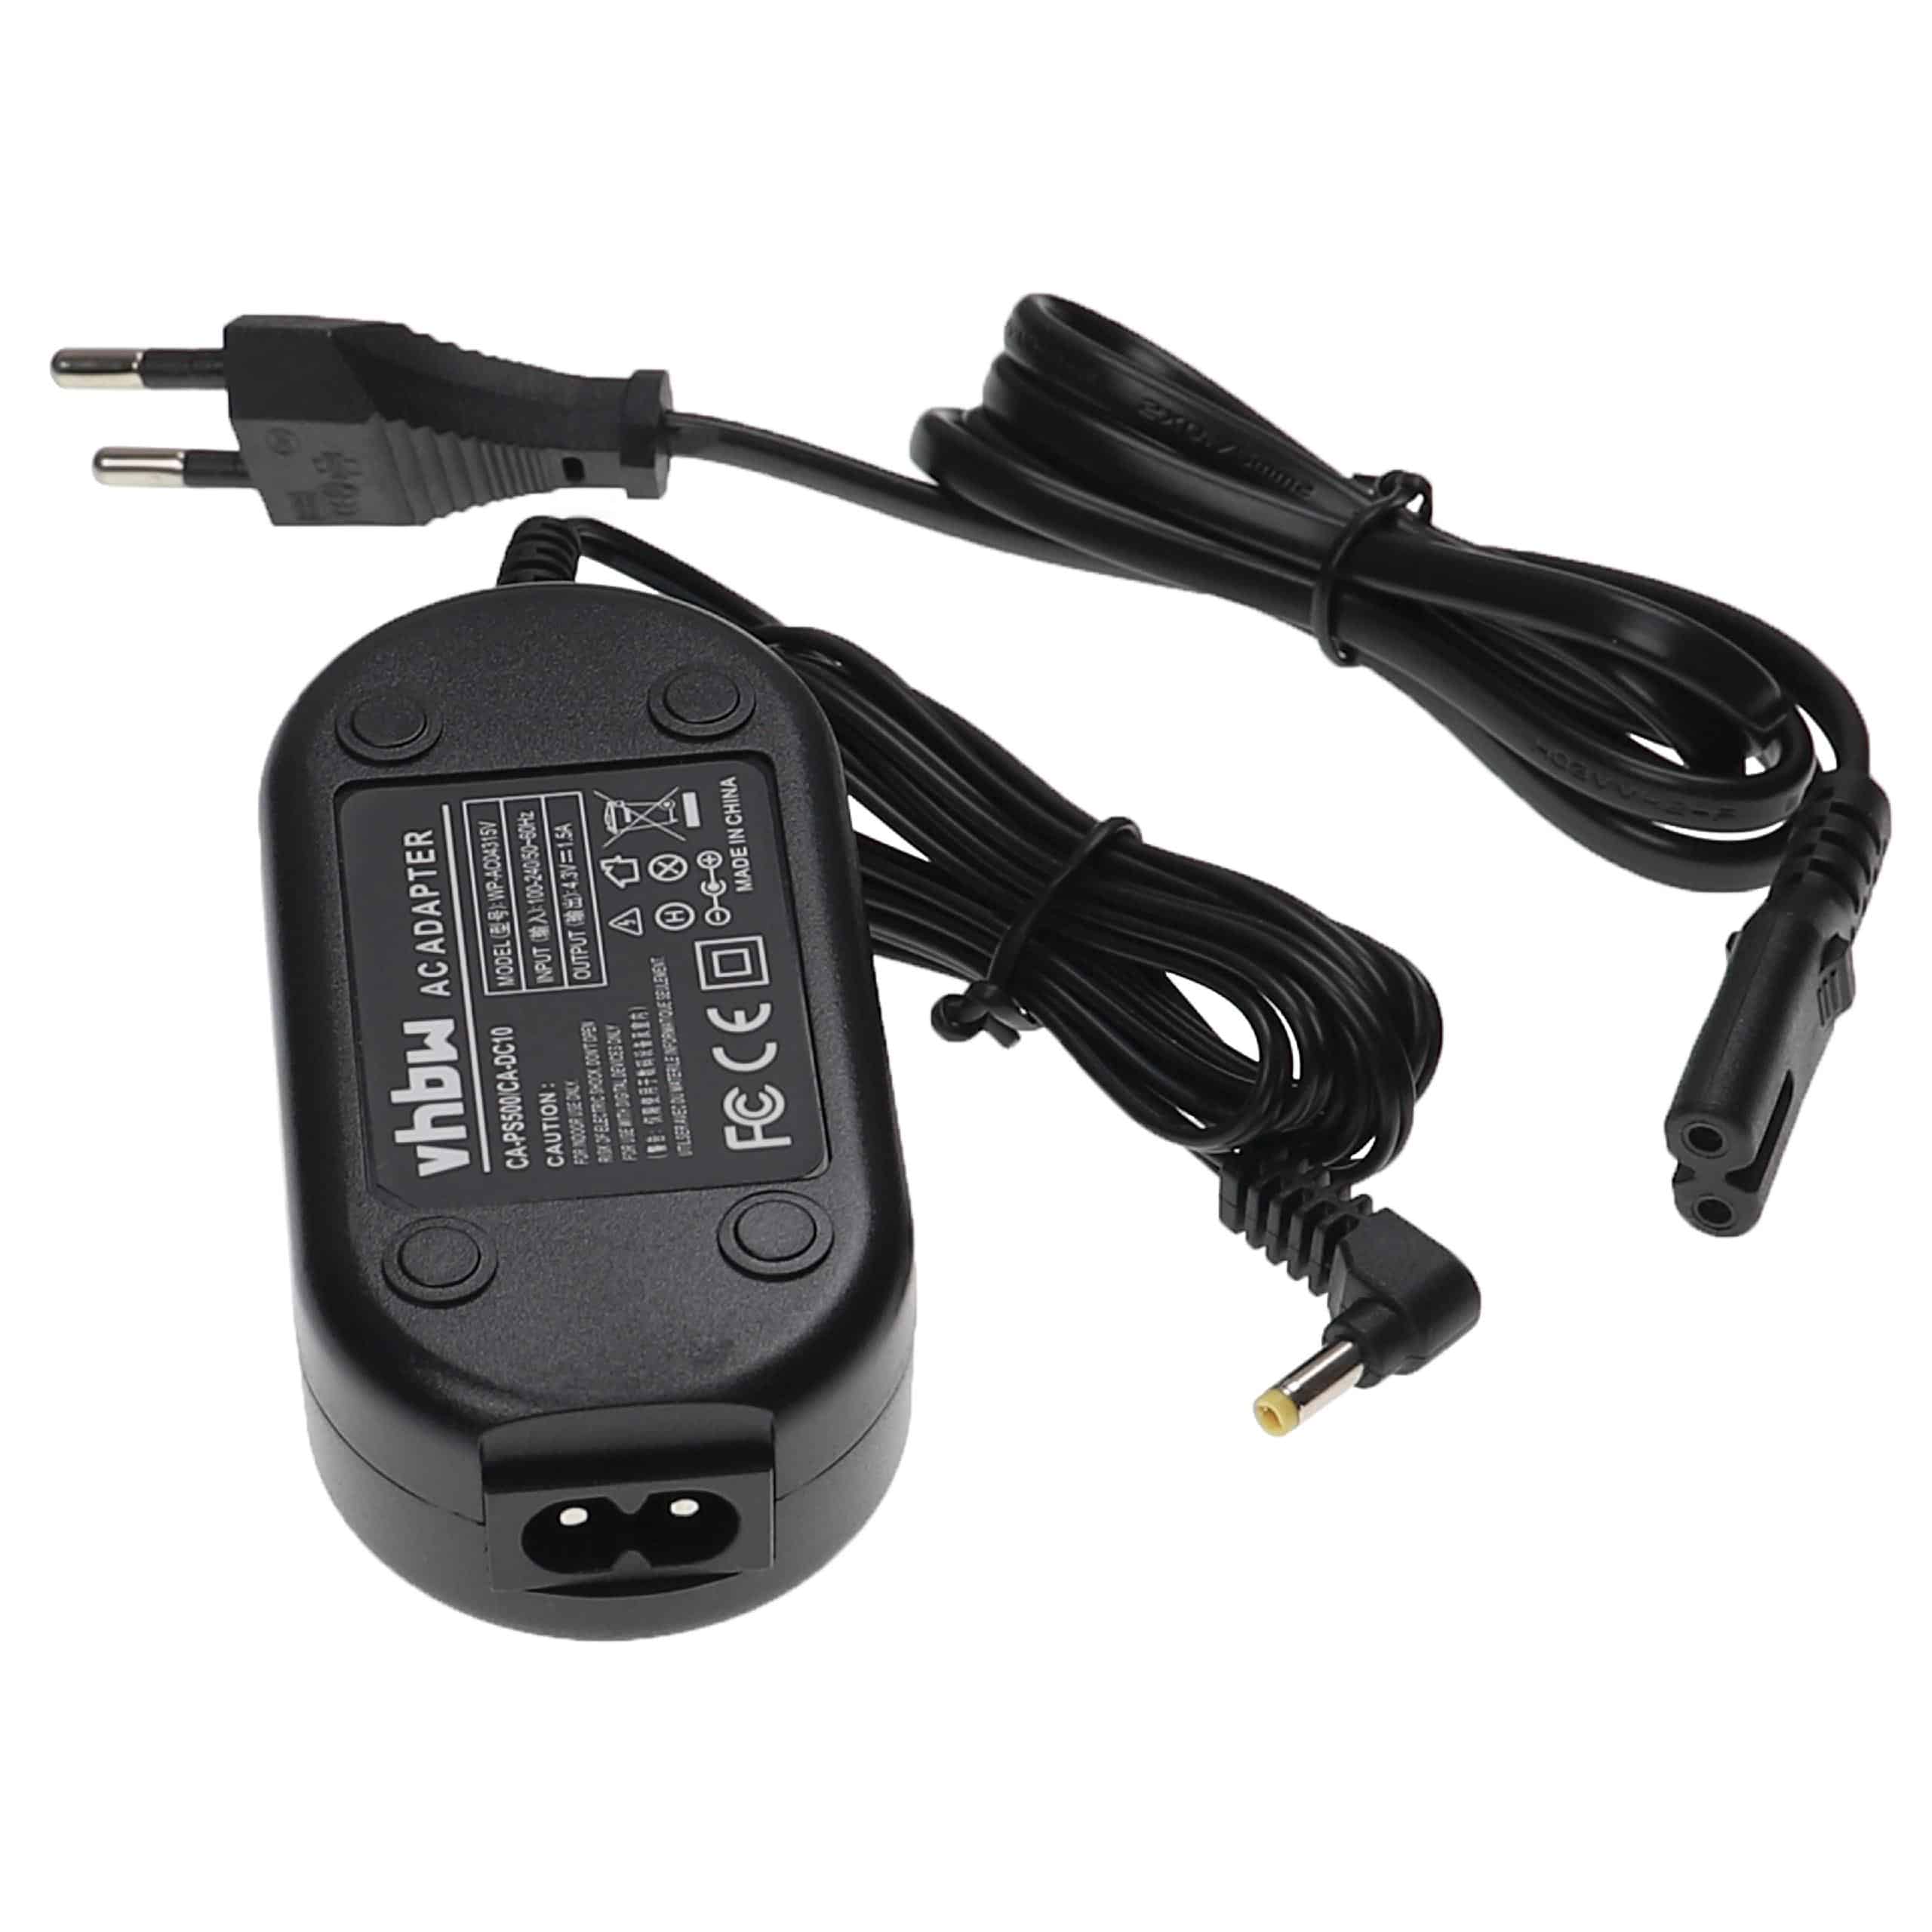 Power Supply replaces CA-PS600CA-PS500CA-PS400ACK-DC10 for Camera - 2 m, 4.3 V 2.0 A